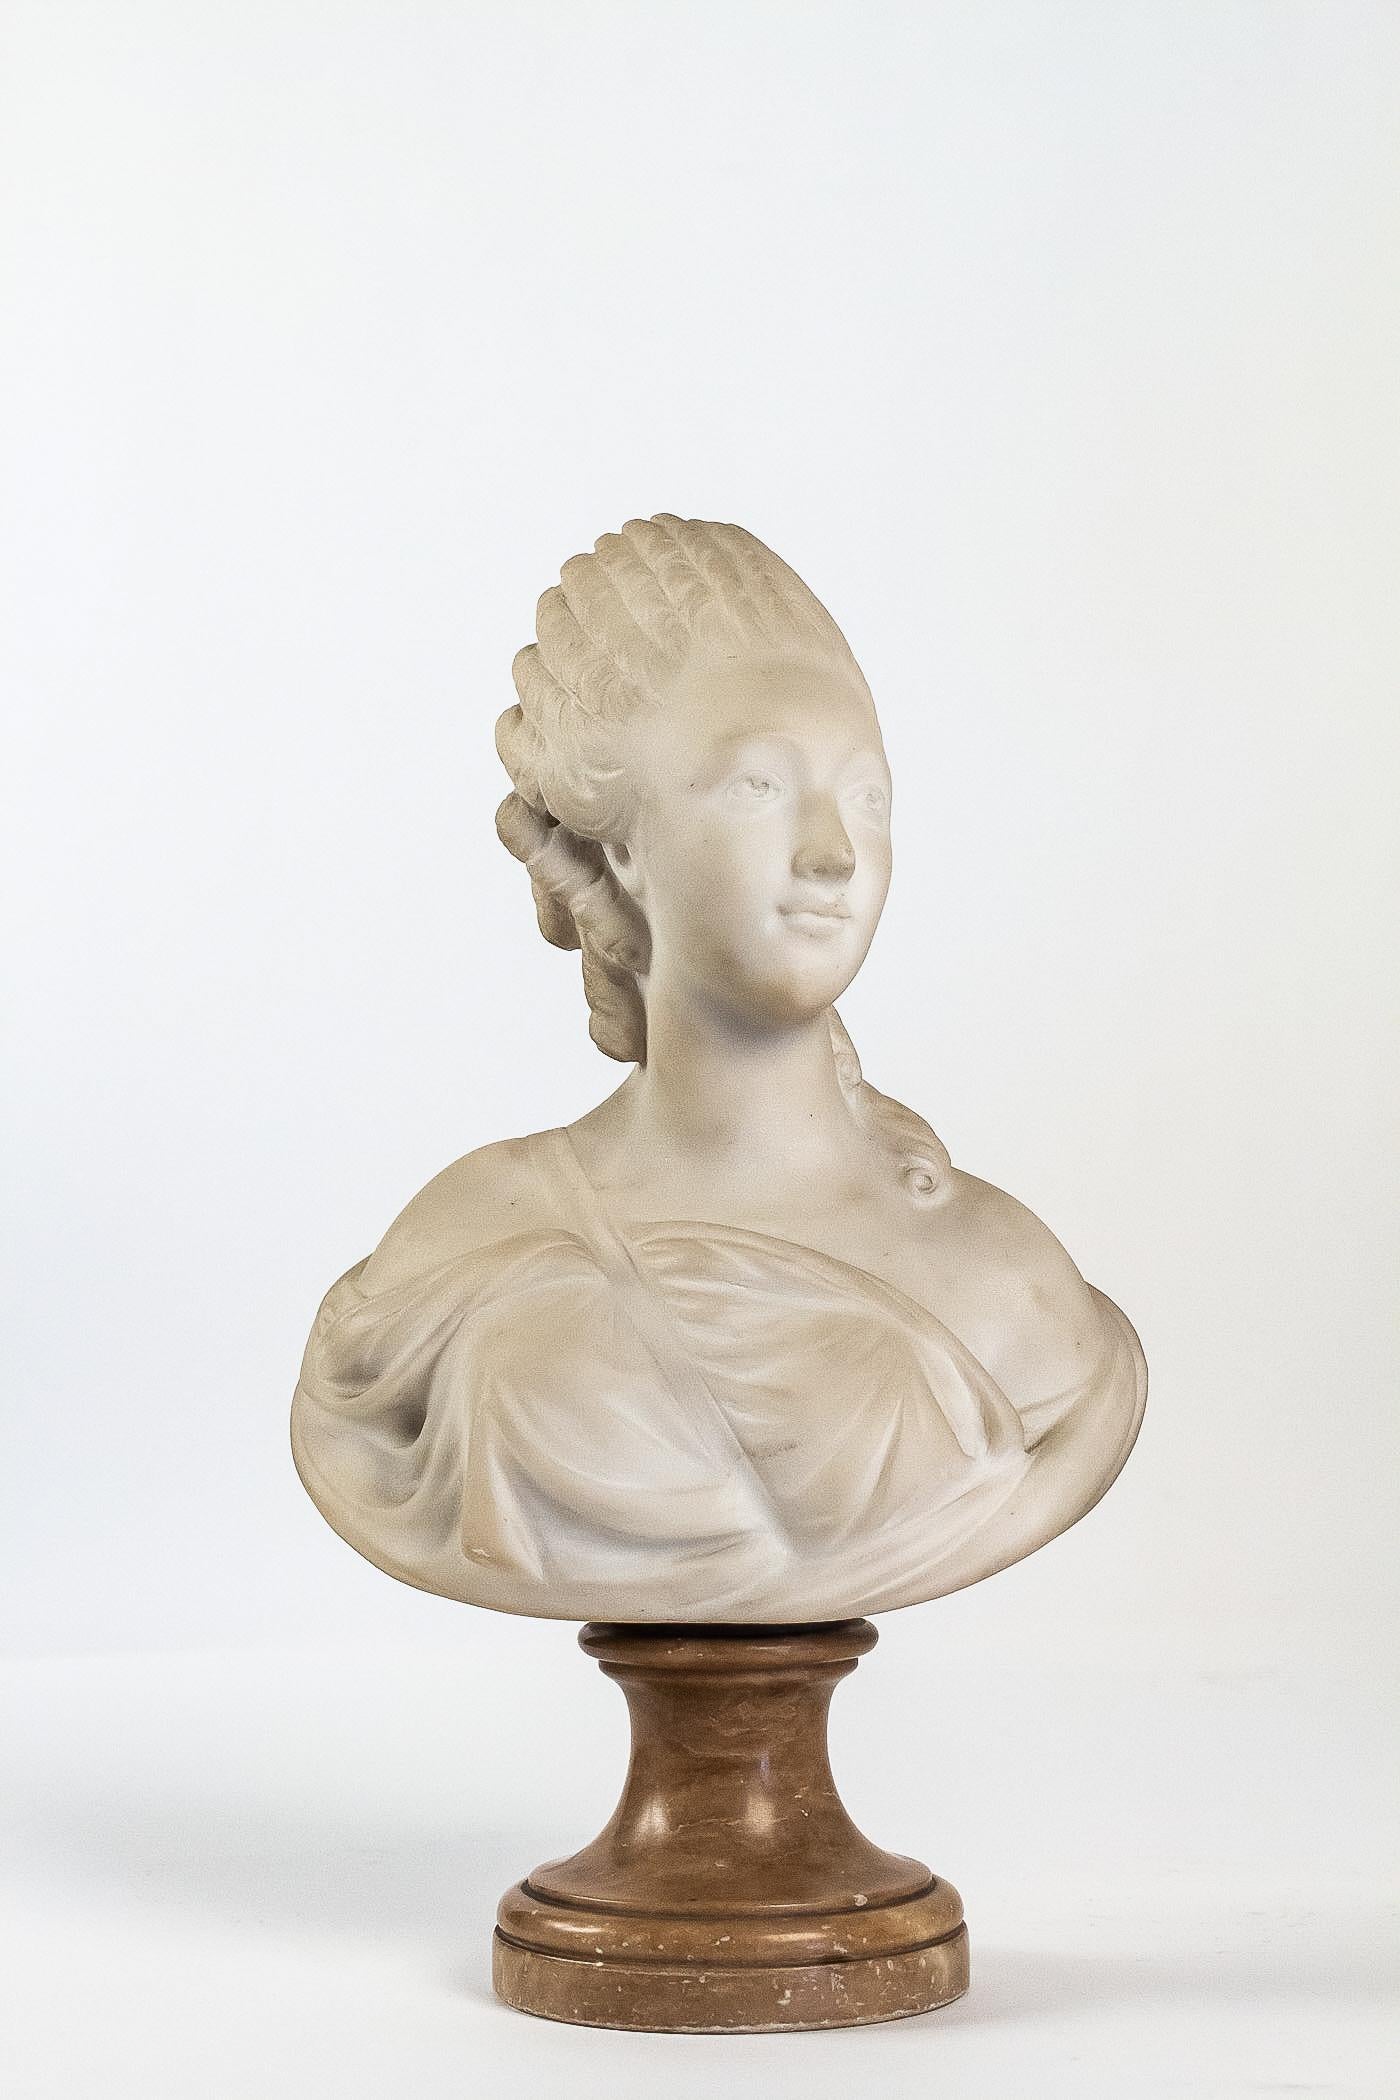 Small white marble bust of countess du Barry, after Augustin Pajou.

A lovely elegant and decorative small white marble bust of Countess du Barry carved late 19th-century, perfect to recreate the 18th-century atmosphere. It rests on a marble